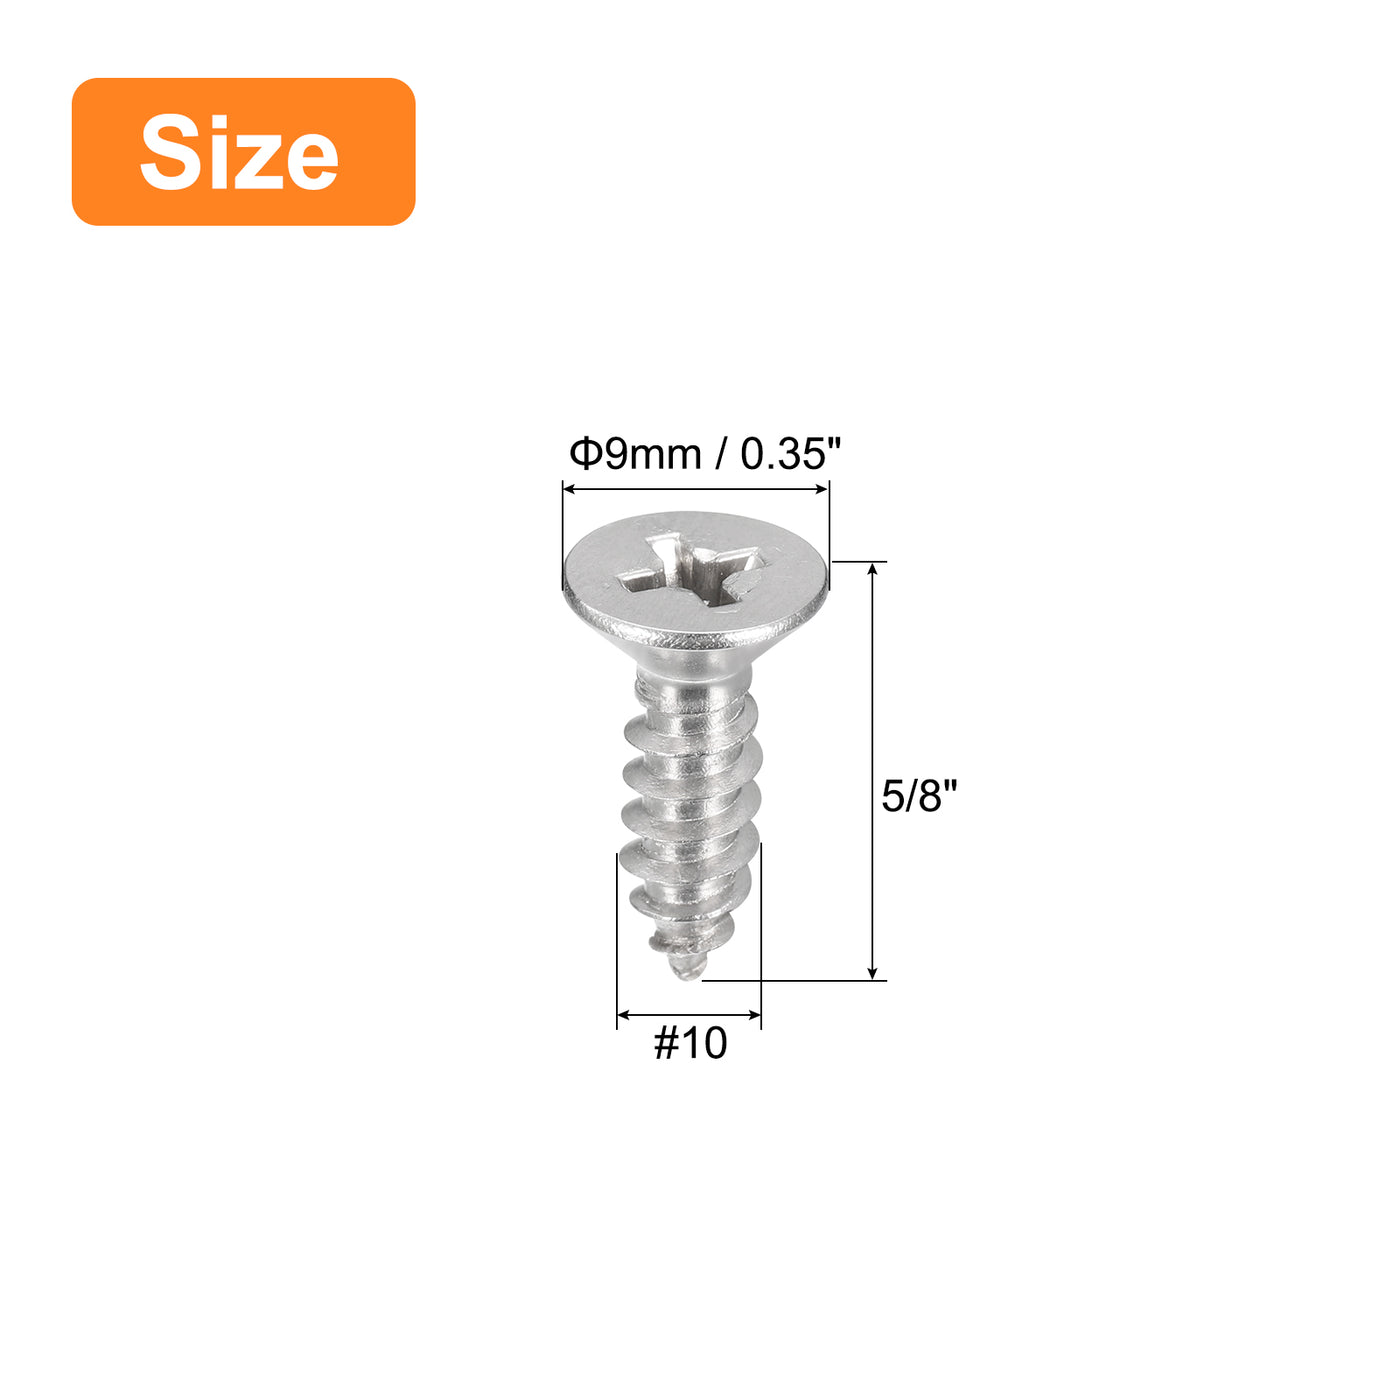 uxcell Uxcell #10x5/8" Wood Screws, 50pcs Phillips Self Tapping Screws 304 Stainless Steel